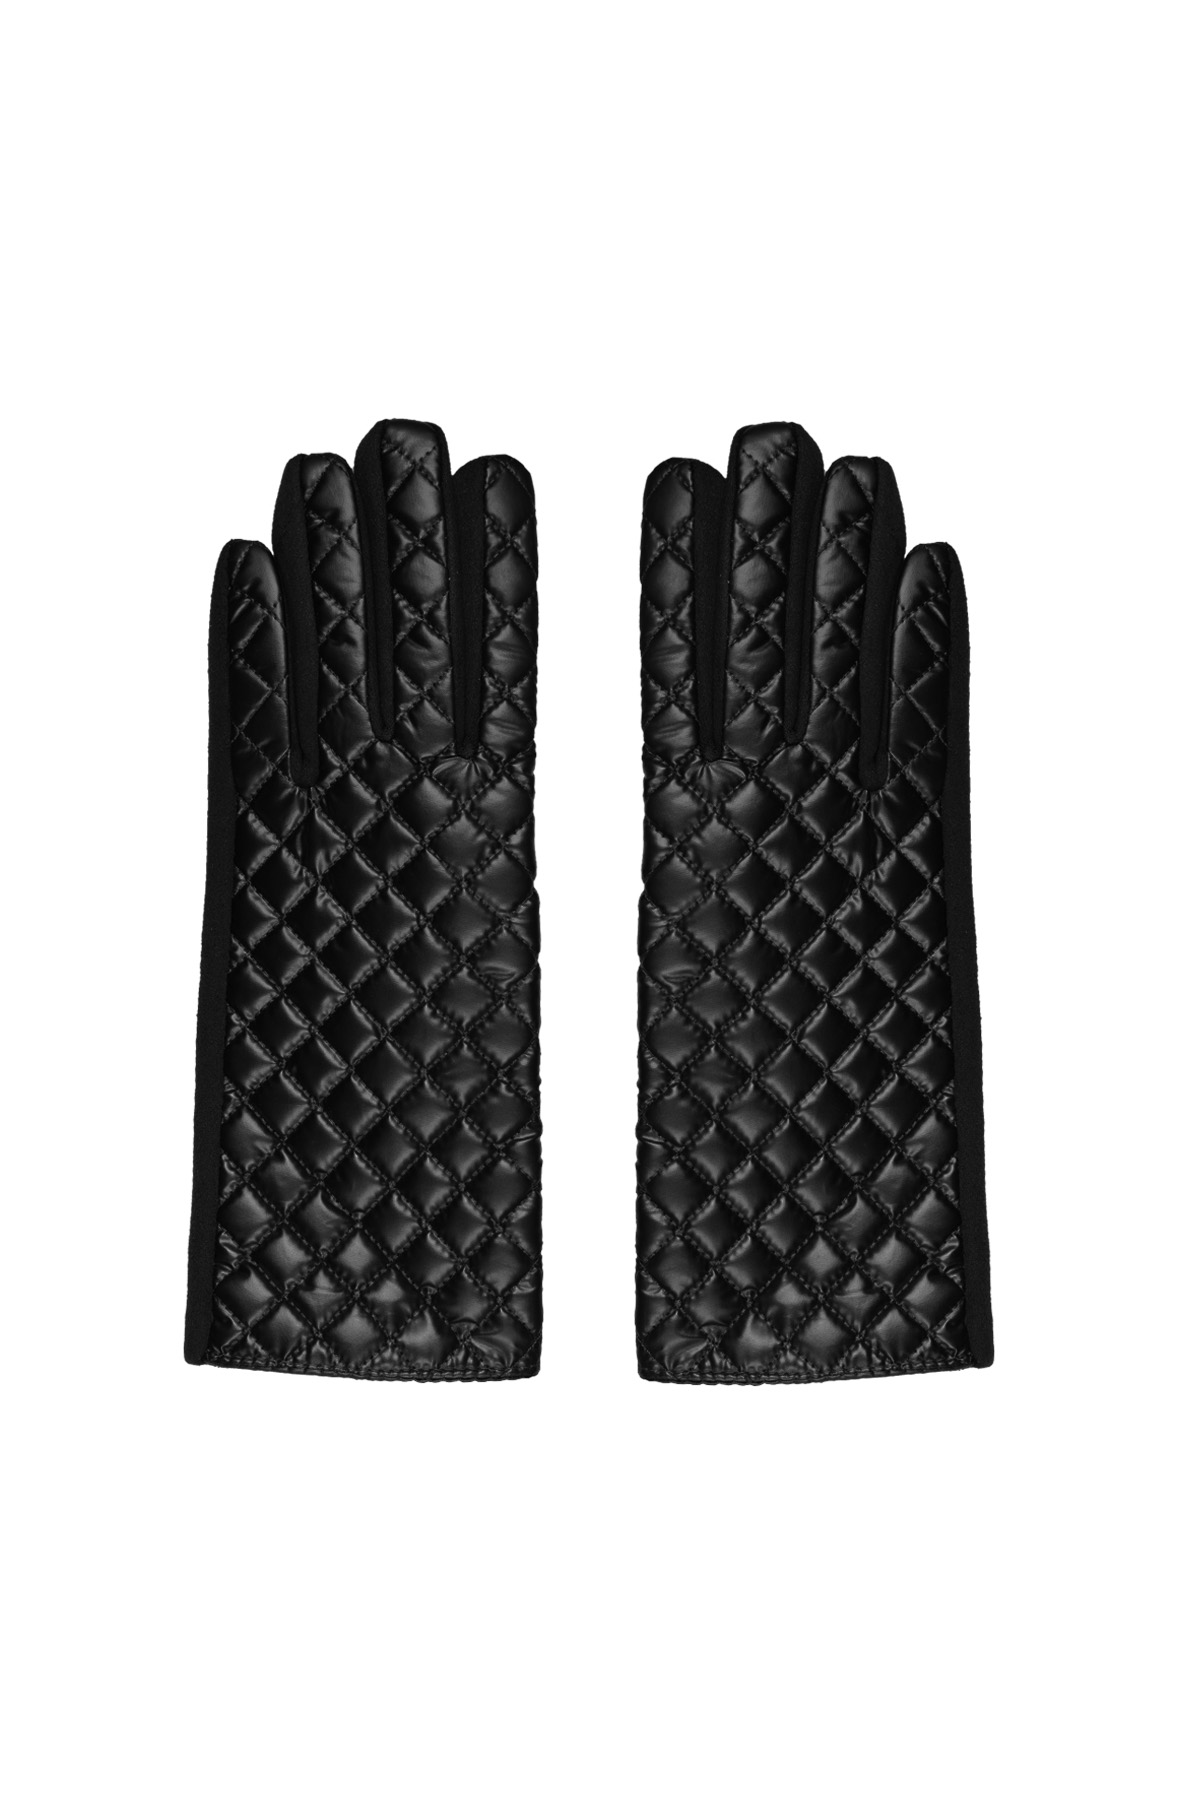 Gloves with stitched pattern - black h5 